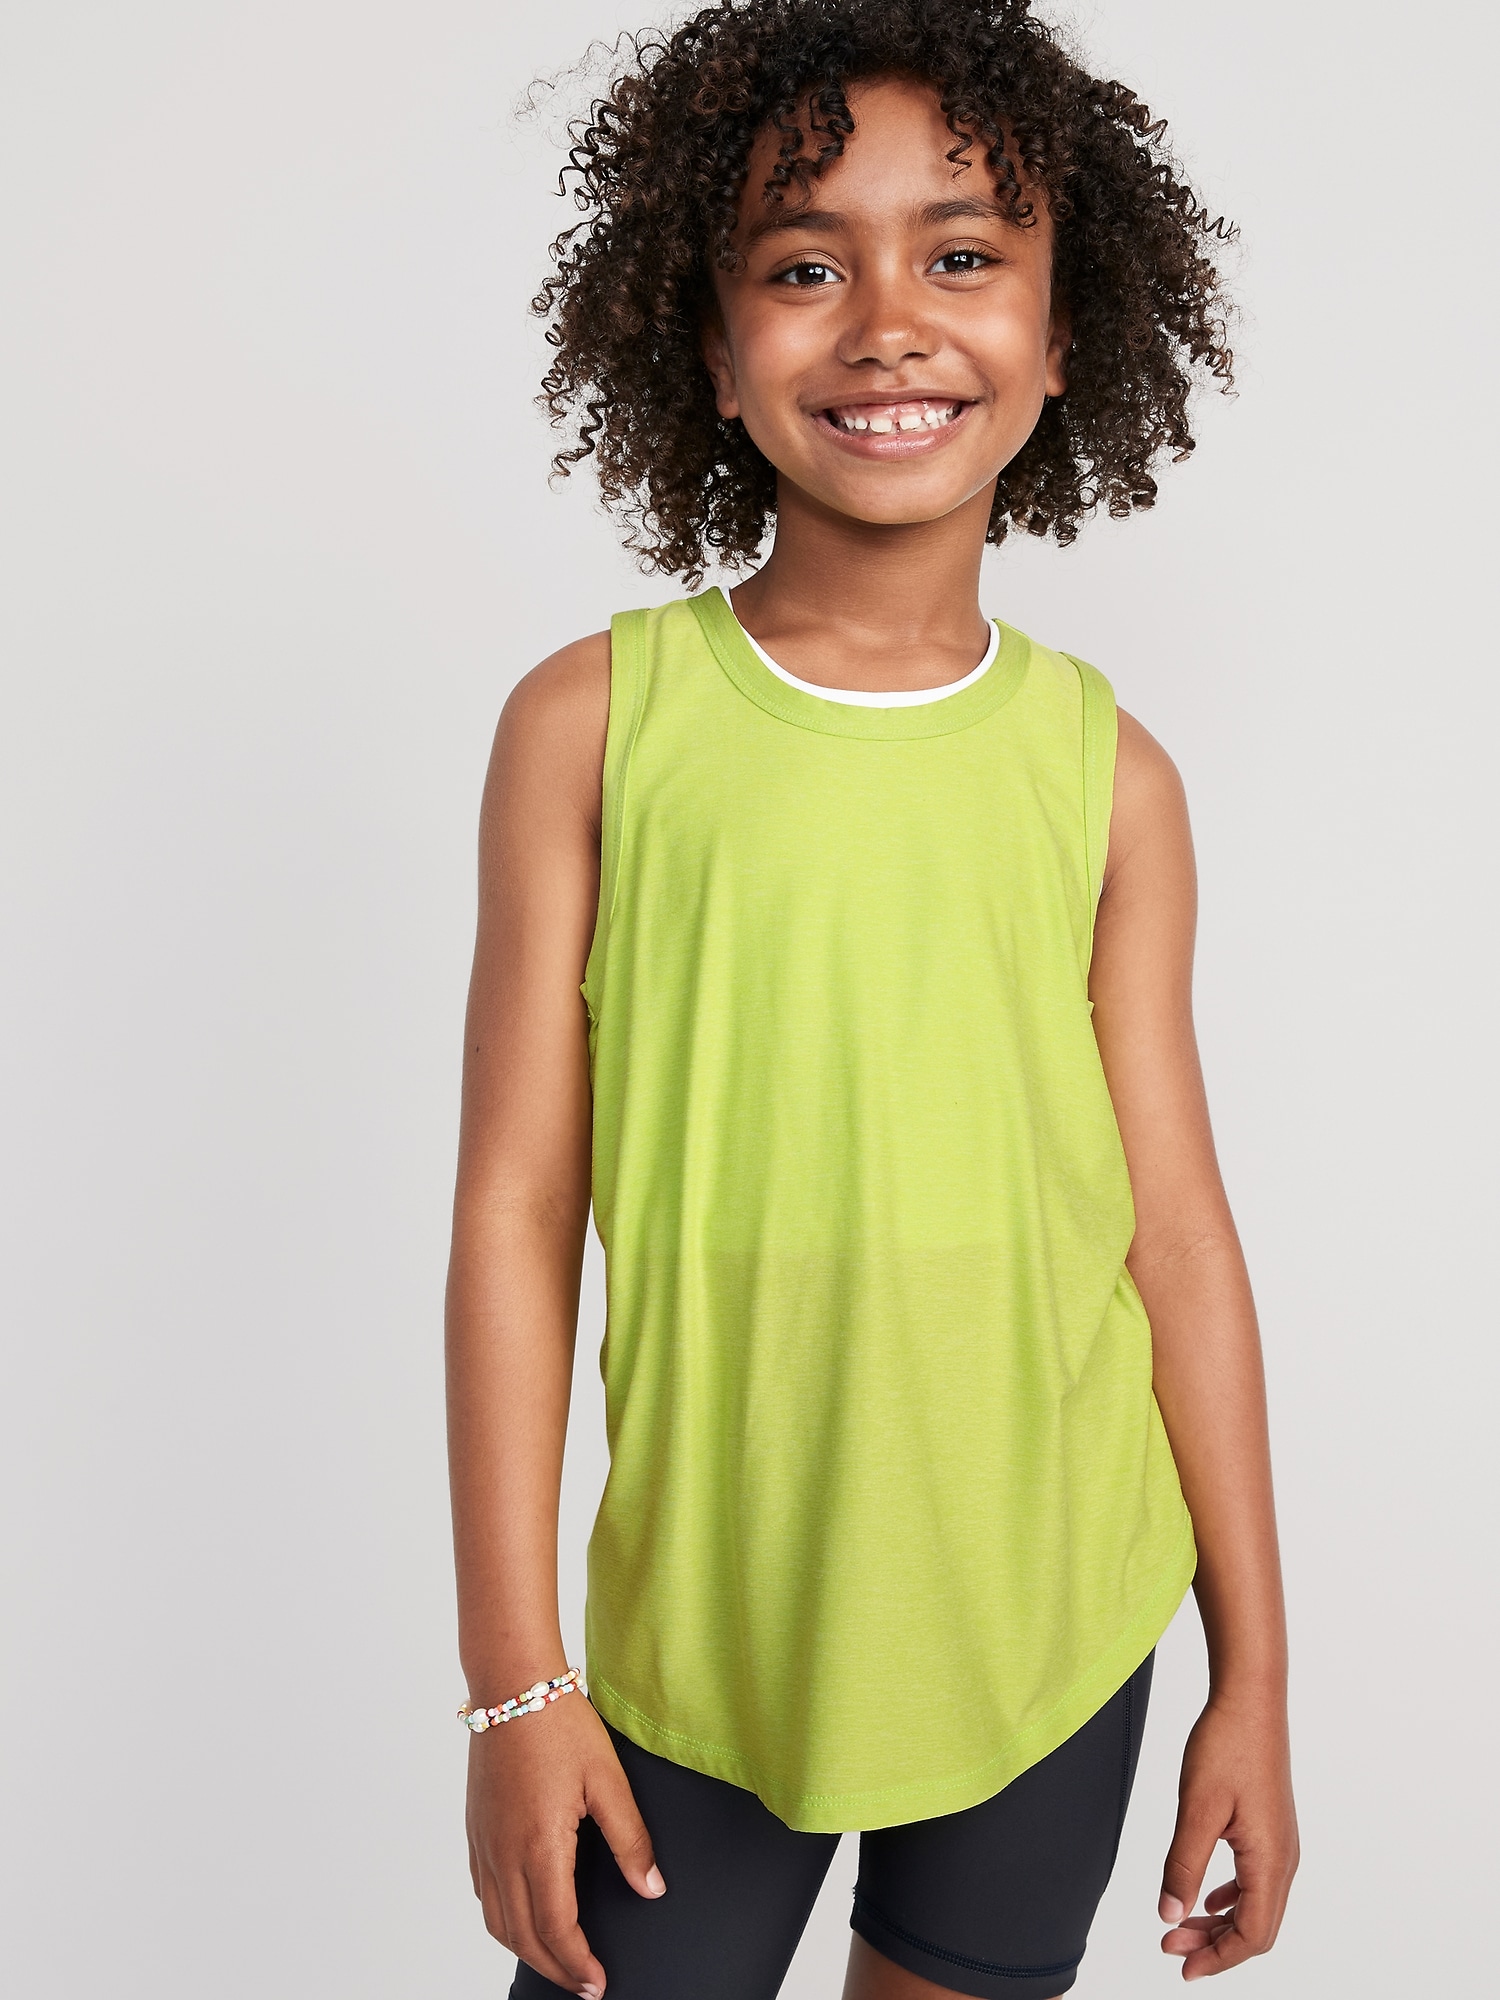 Old Navy Cloud 94 Soft Go-Dry Cool Tunic Tank Top for Girls green. 1